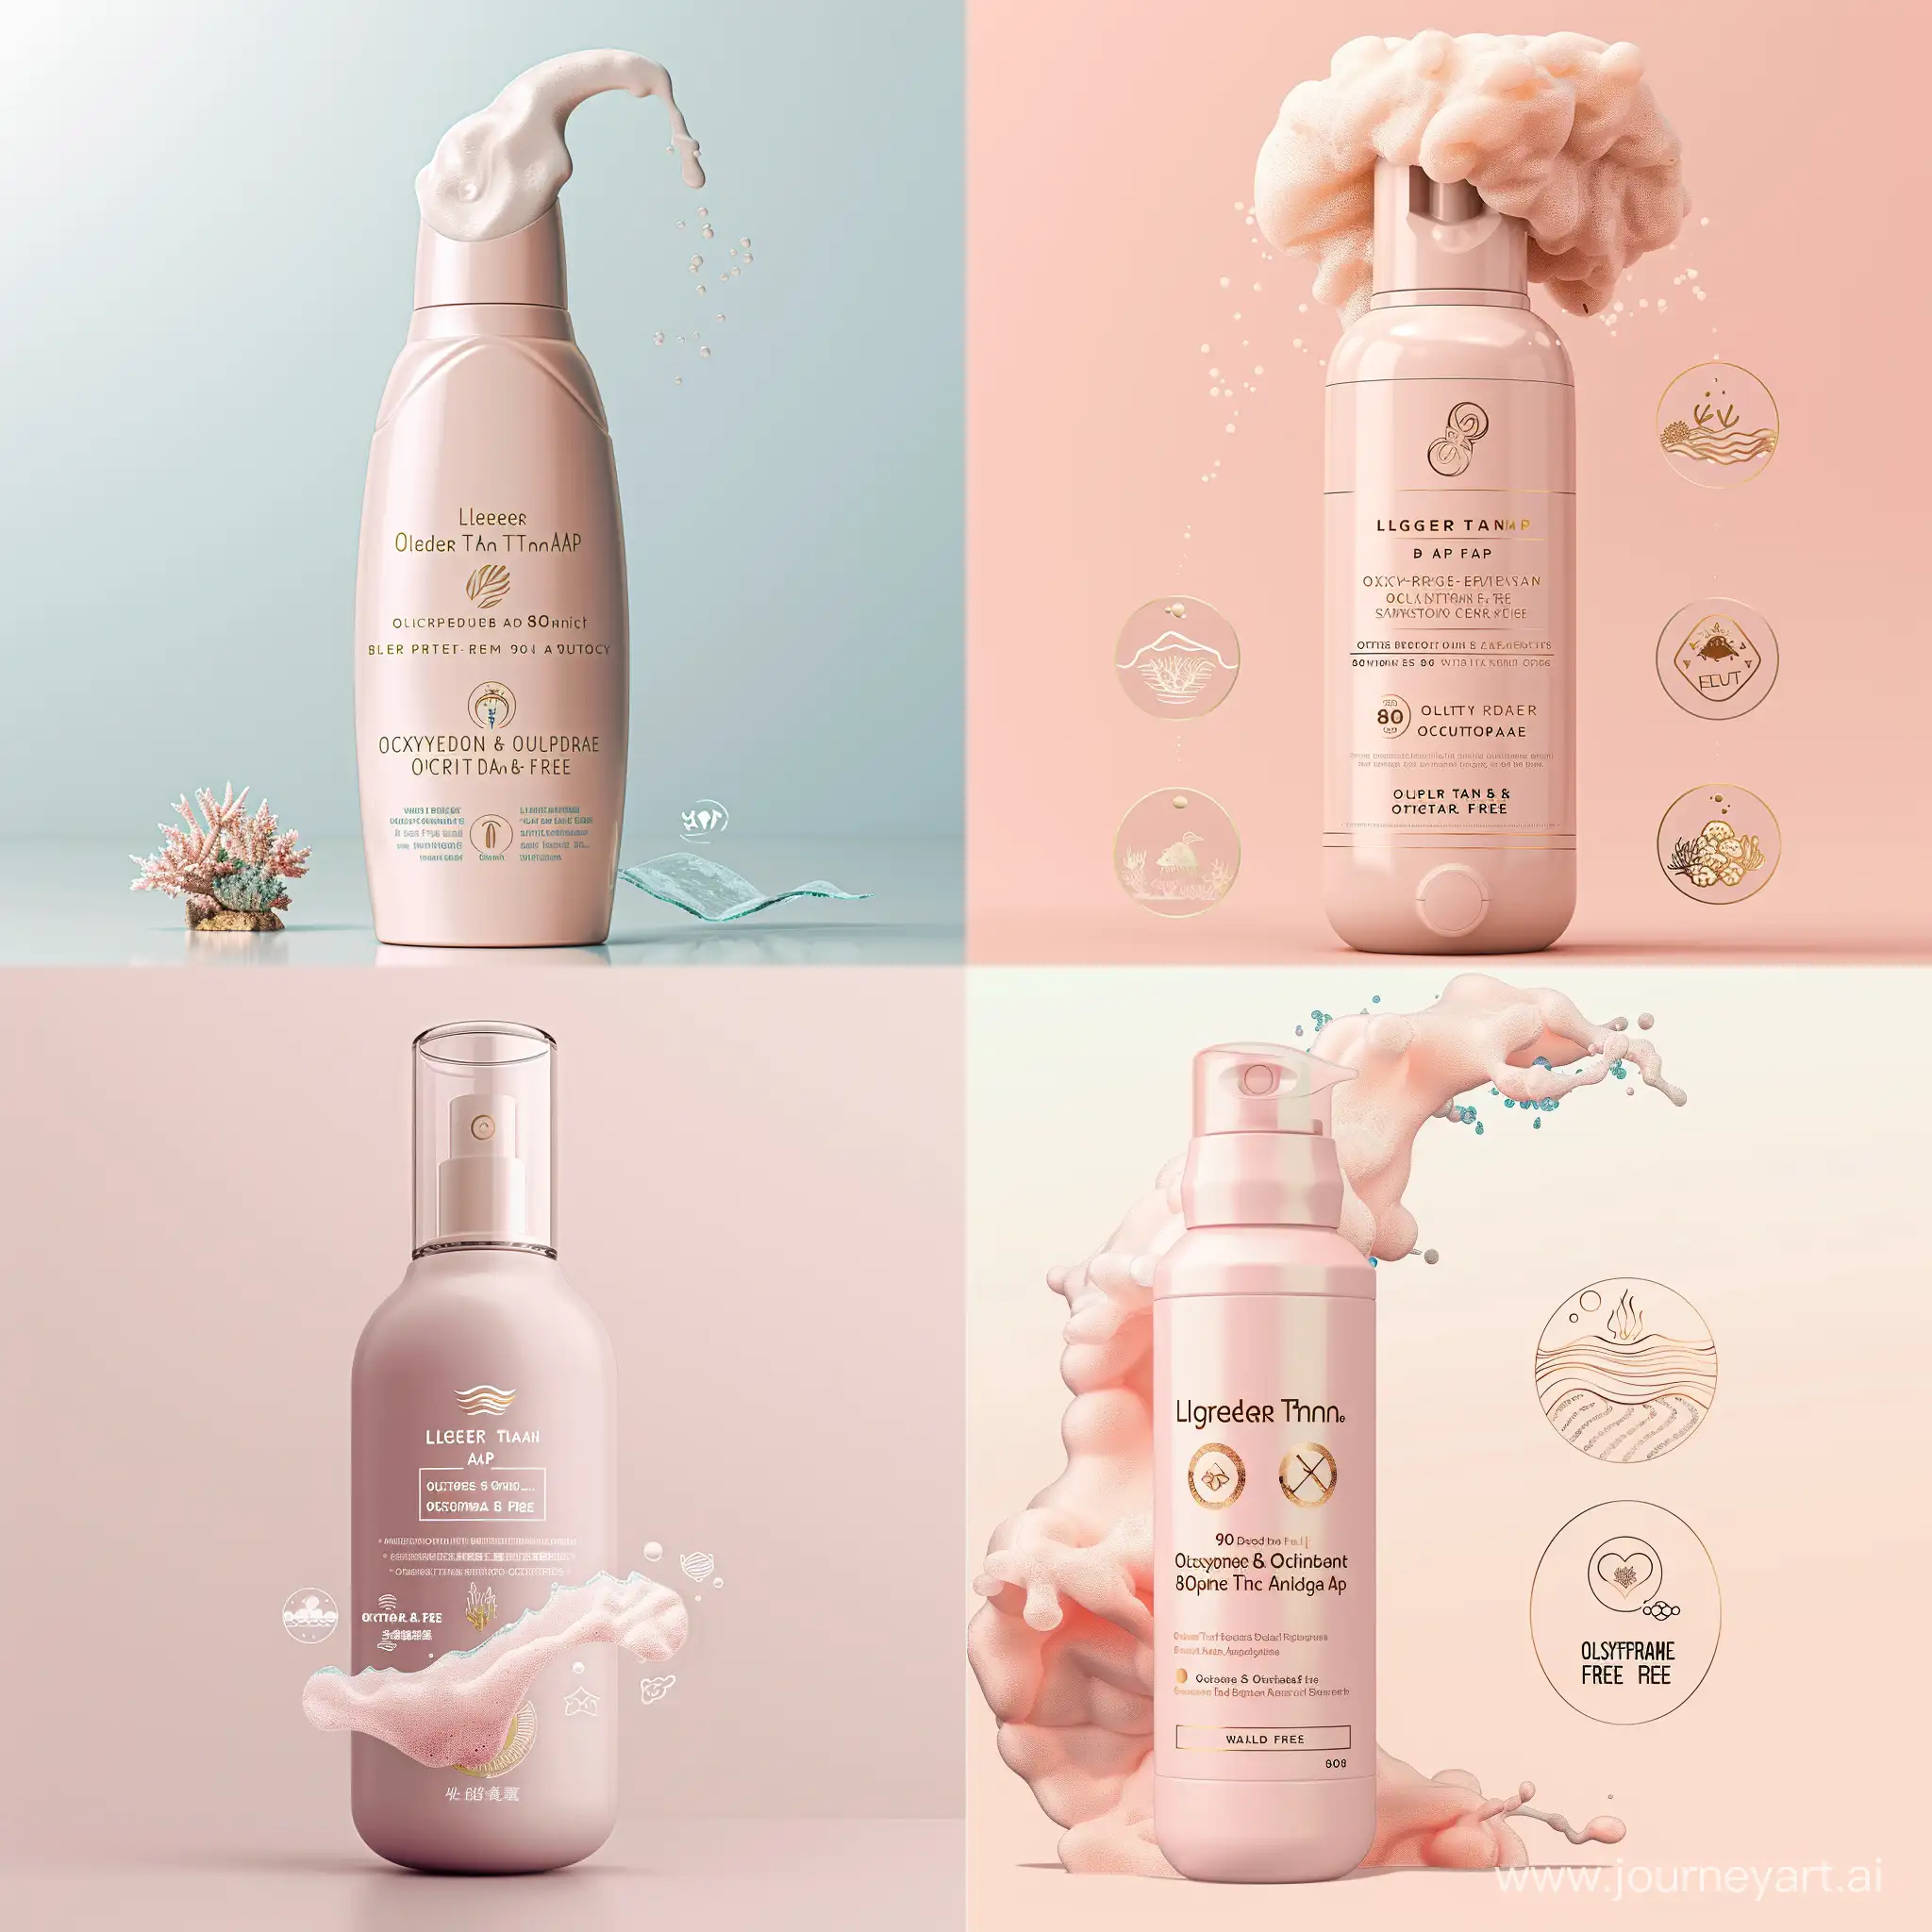 imagine a sleek, baby pink  bottle. The bottle should have a foam dispenser and look luxorious and synoblize pleasure. I dont wnat to see actual foam. The labels on the bottle should be "Lighter-Than-Air" , "Water-Resistant (80 minutes)", "Oxybenzone & Octinoxate free." They should be wrtitten in gold color. Additionally, include symbols representing the product being eco-friendly, cruelty-free, and vegan attributes. Also add a small image of a wave and a coral reef

